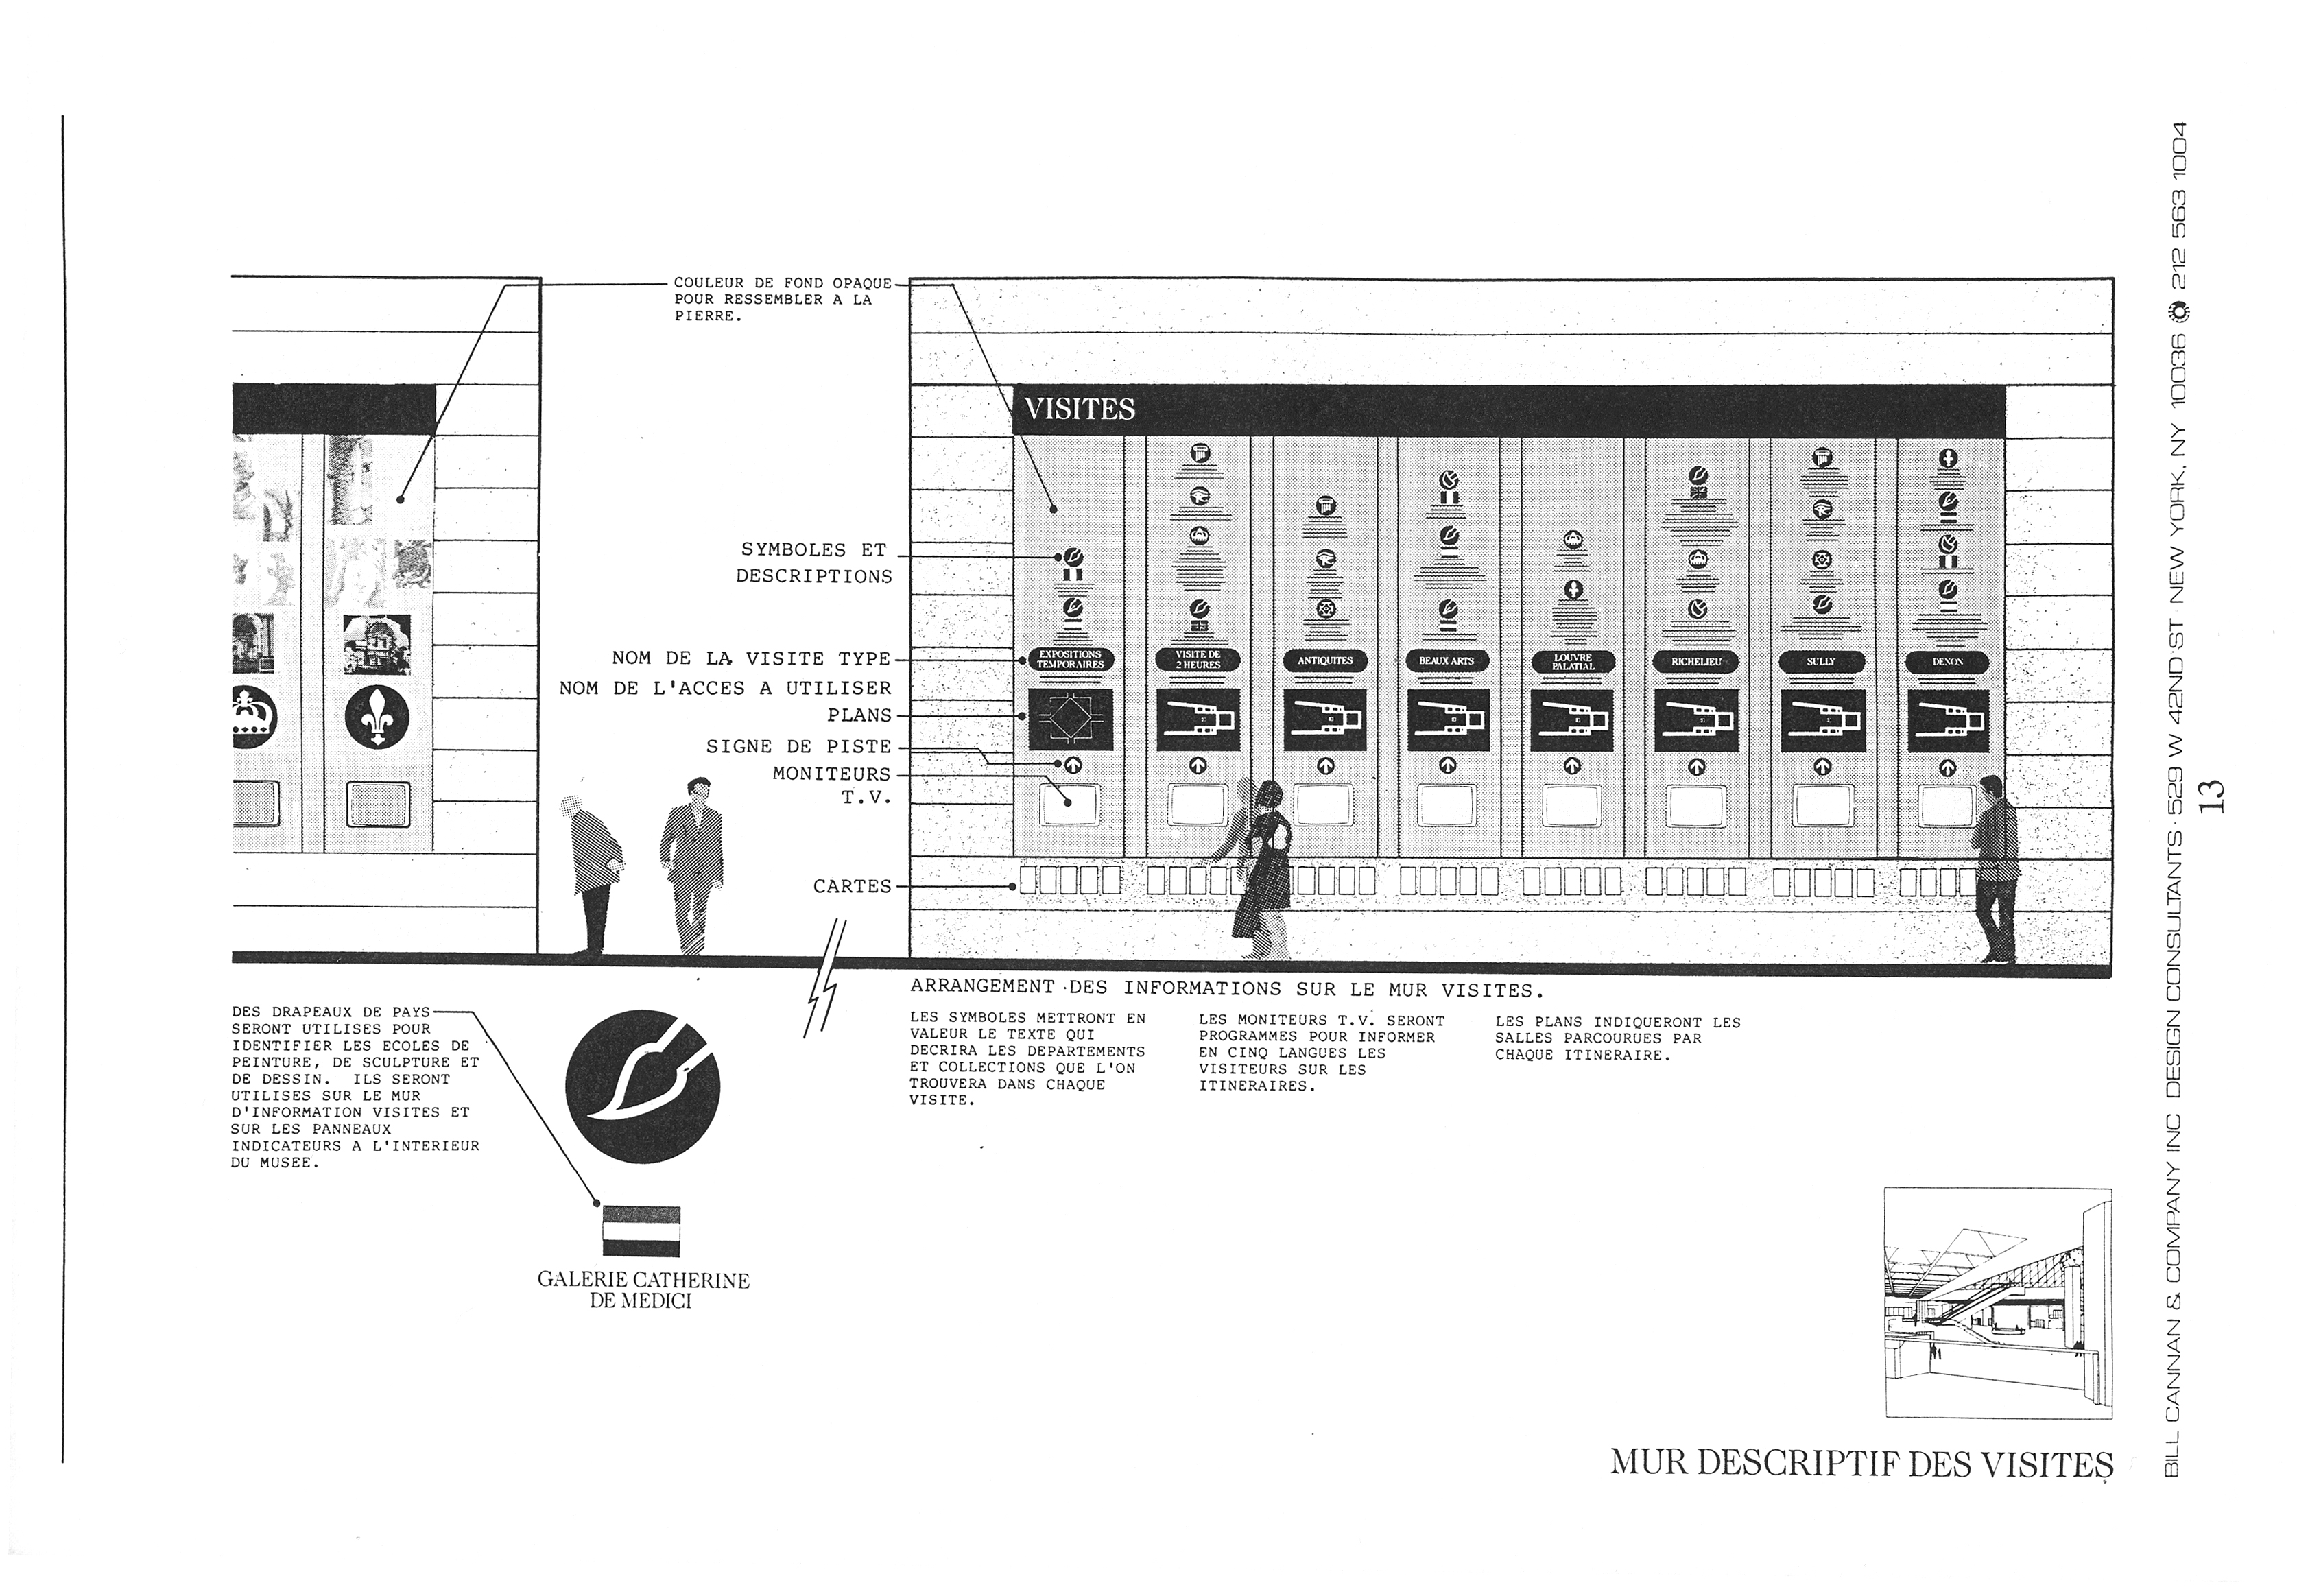 Diagram of teh Wall B vertical signage sections, with people walkig by.